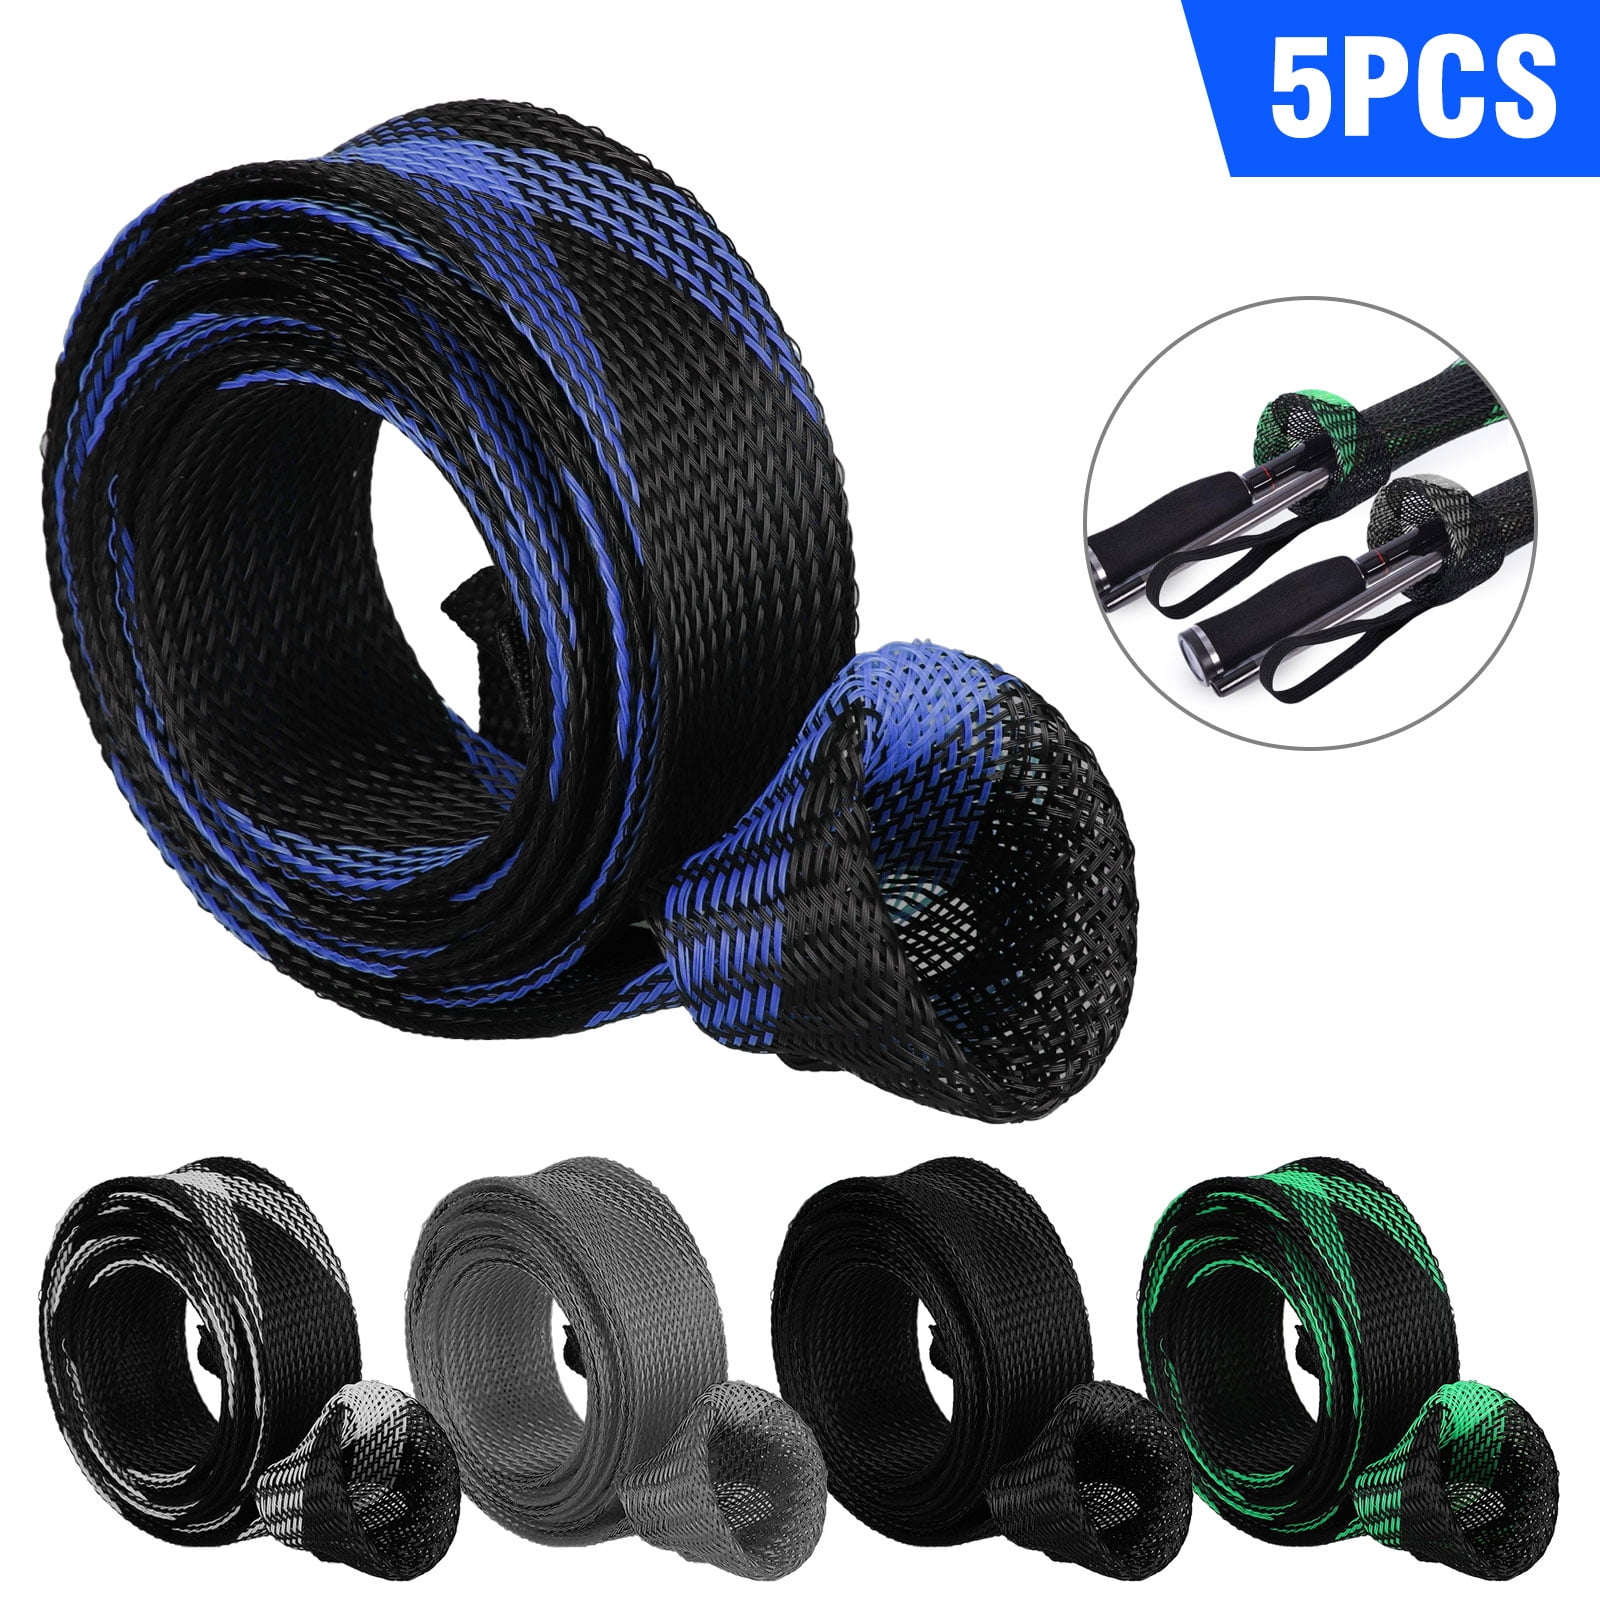 Fishing Rod Ties & Bands With High Elastic Protective Sleeve